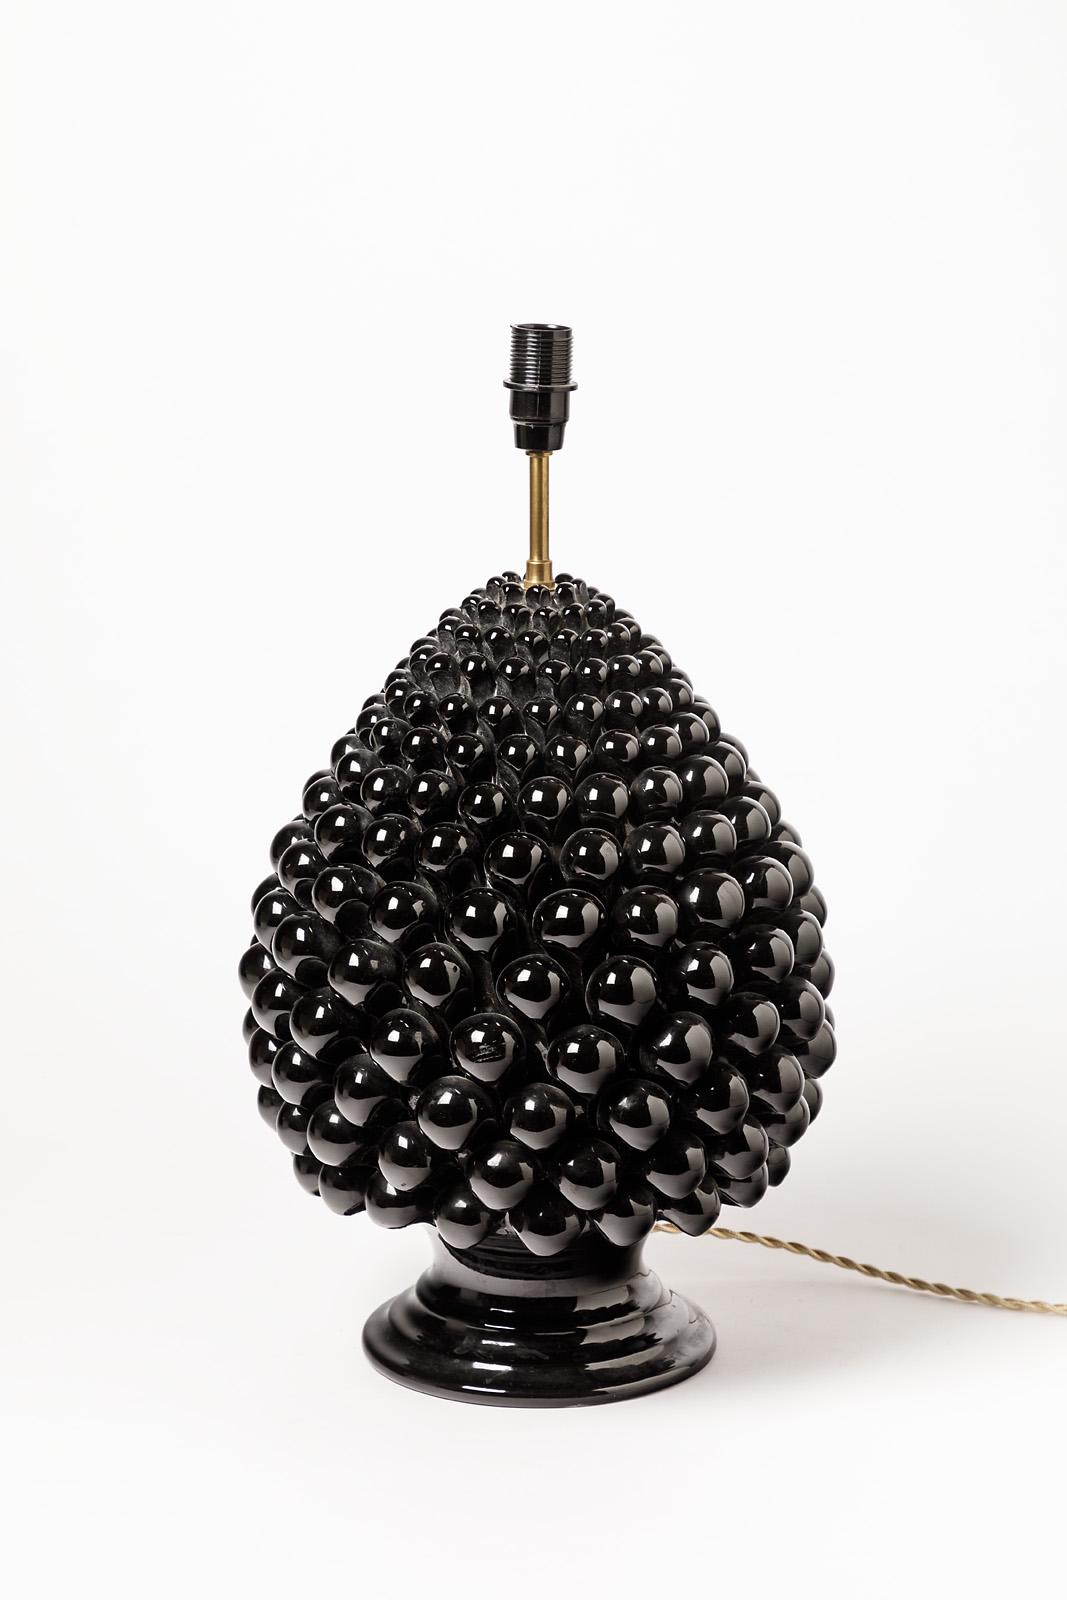 20th midcentury Italian table lamp.

Elegant pine apple form with black ceramic color.

Decorative ceramic light in perfect condition with new electric system.

Realized, circa 1975.

Ceramic dimensions: Height 37cm, large 27cm
With